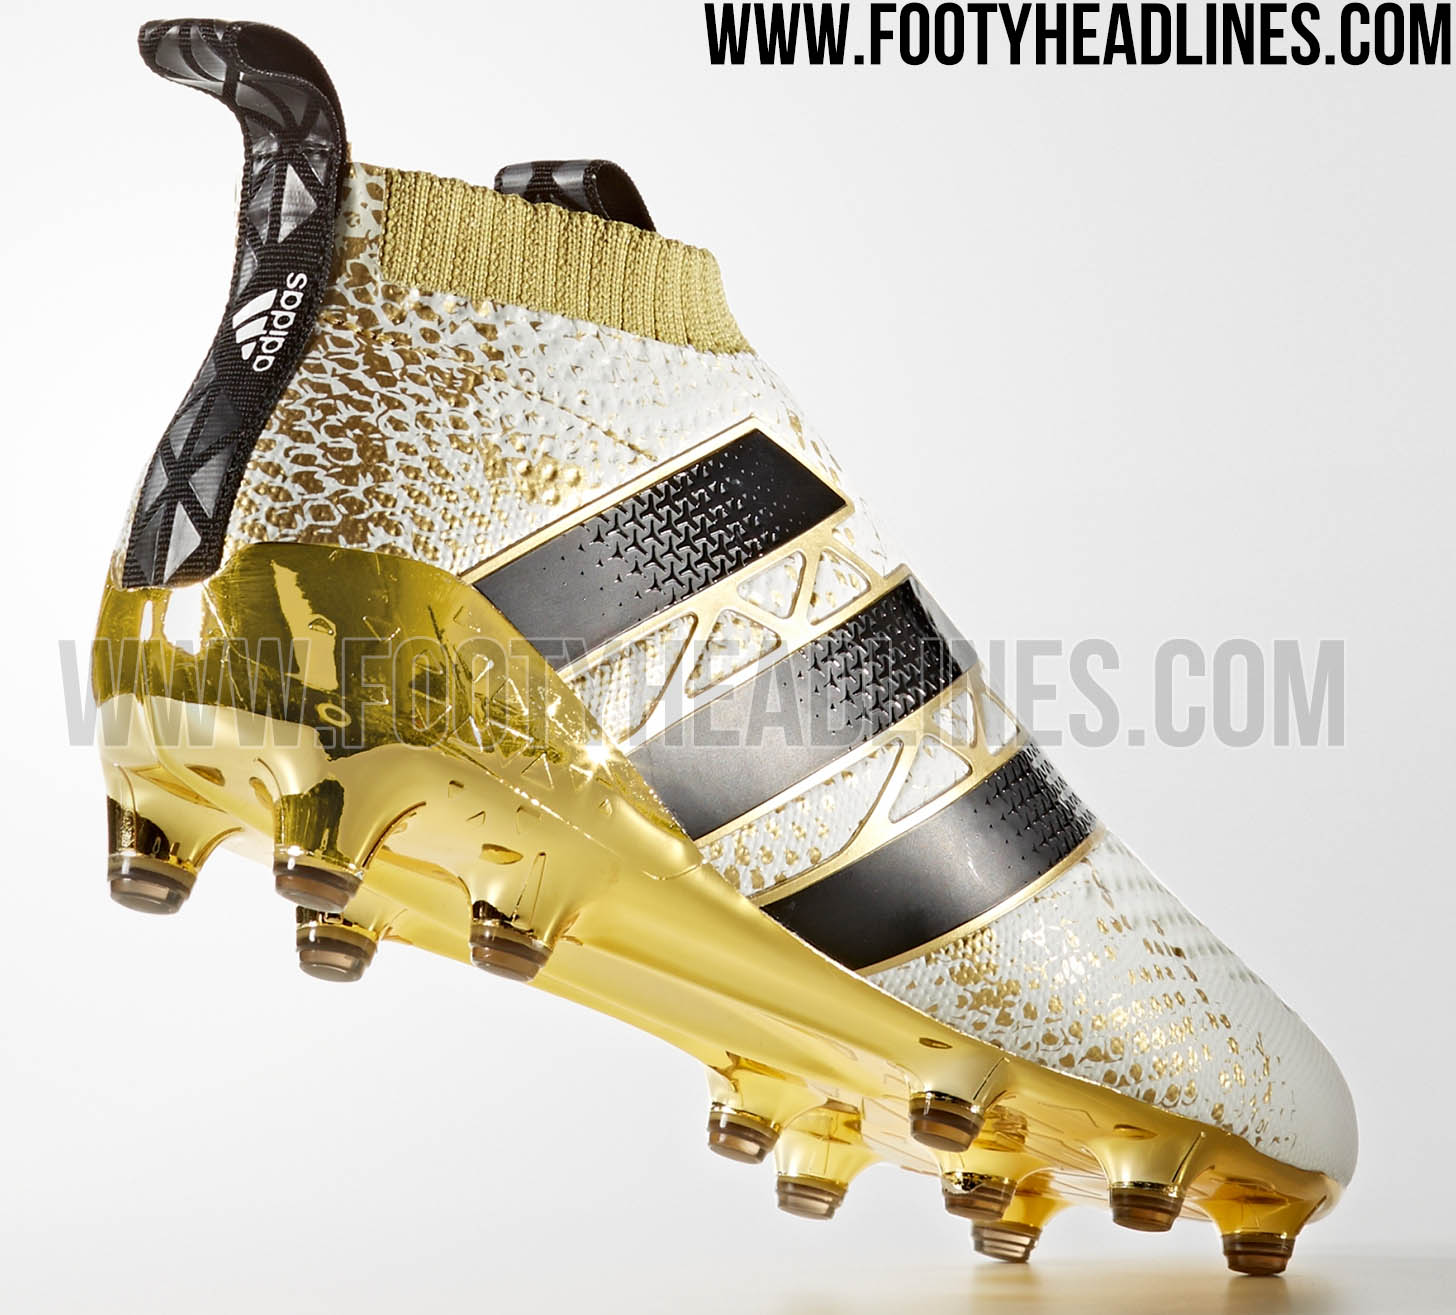 White / Gold Adidas Ace 16+ PureControl Pack Boots Released - Footy Headlines